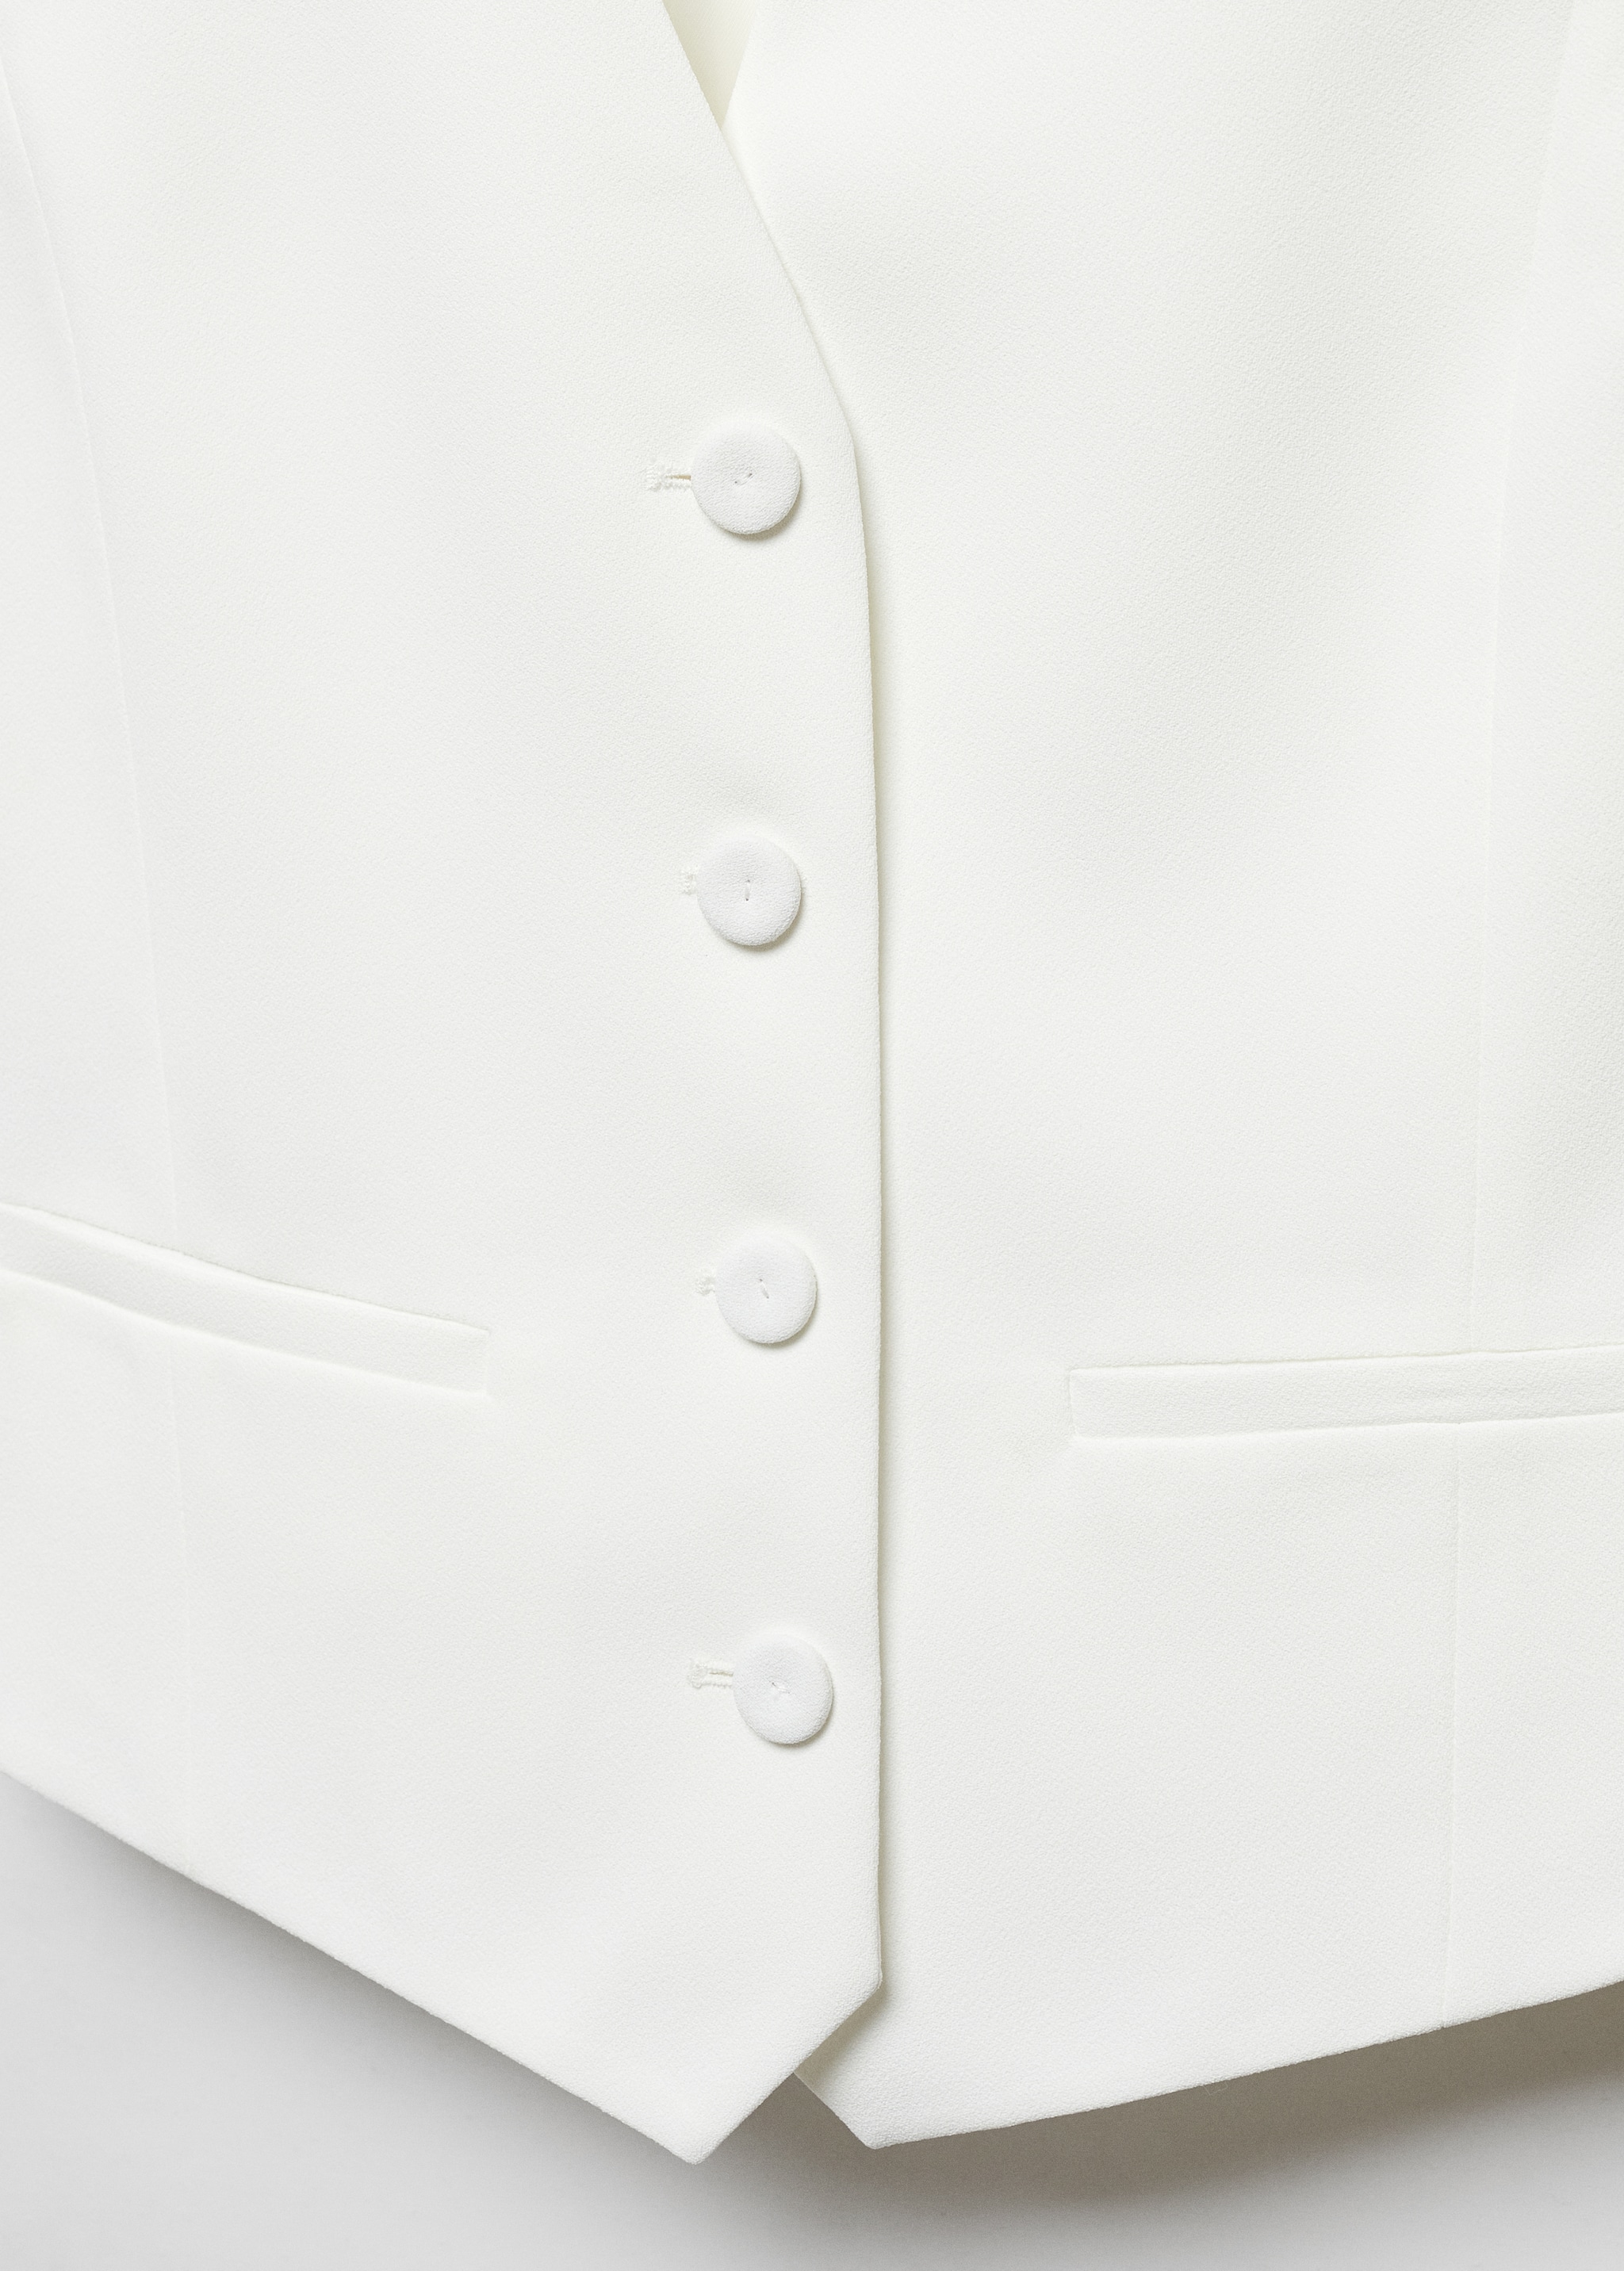 Suit waistcoat with buttons - Details of the article 8